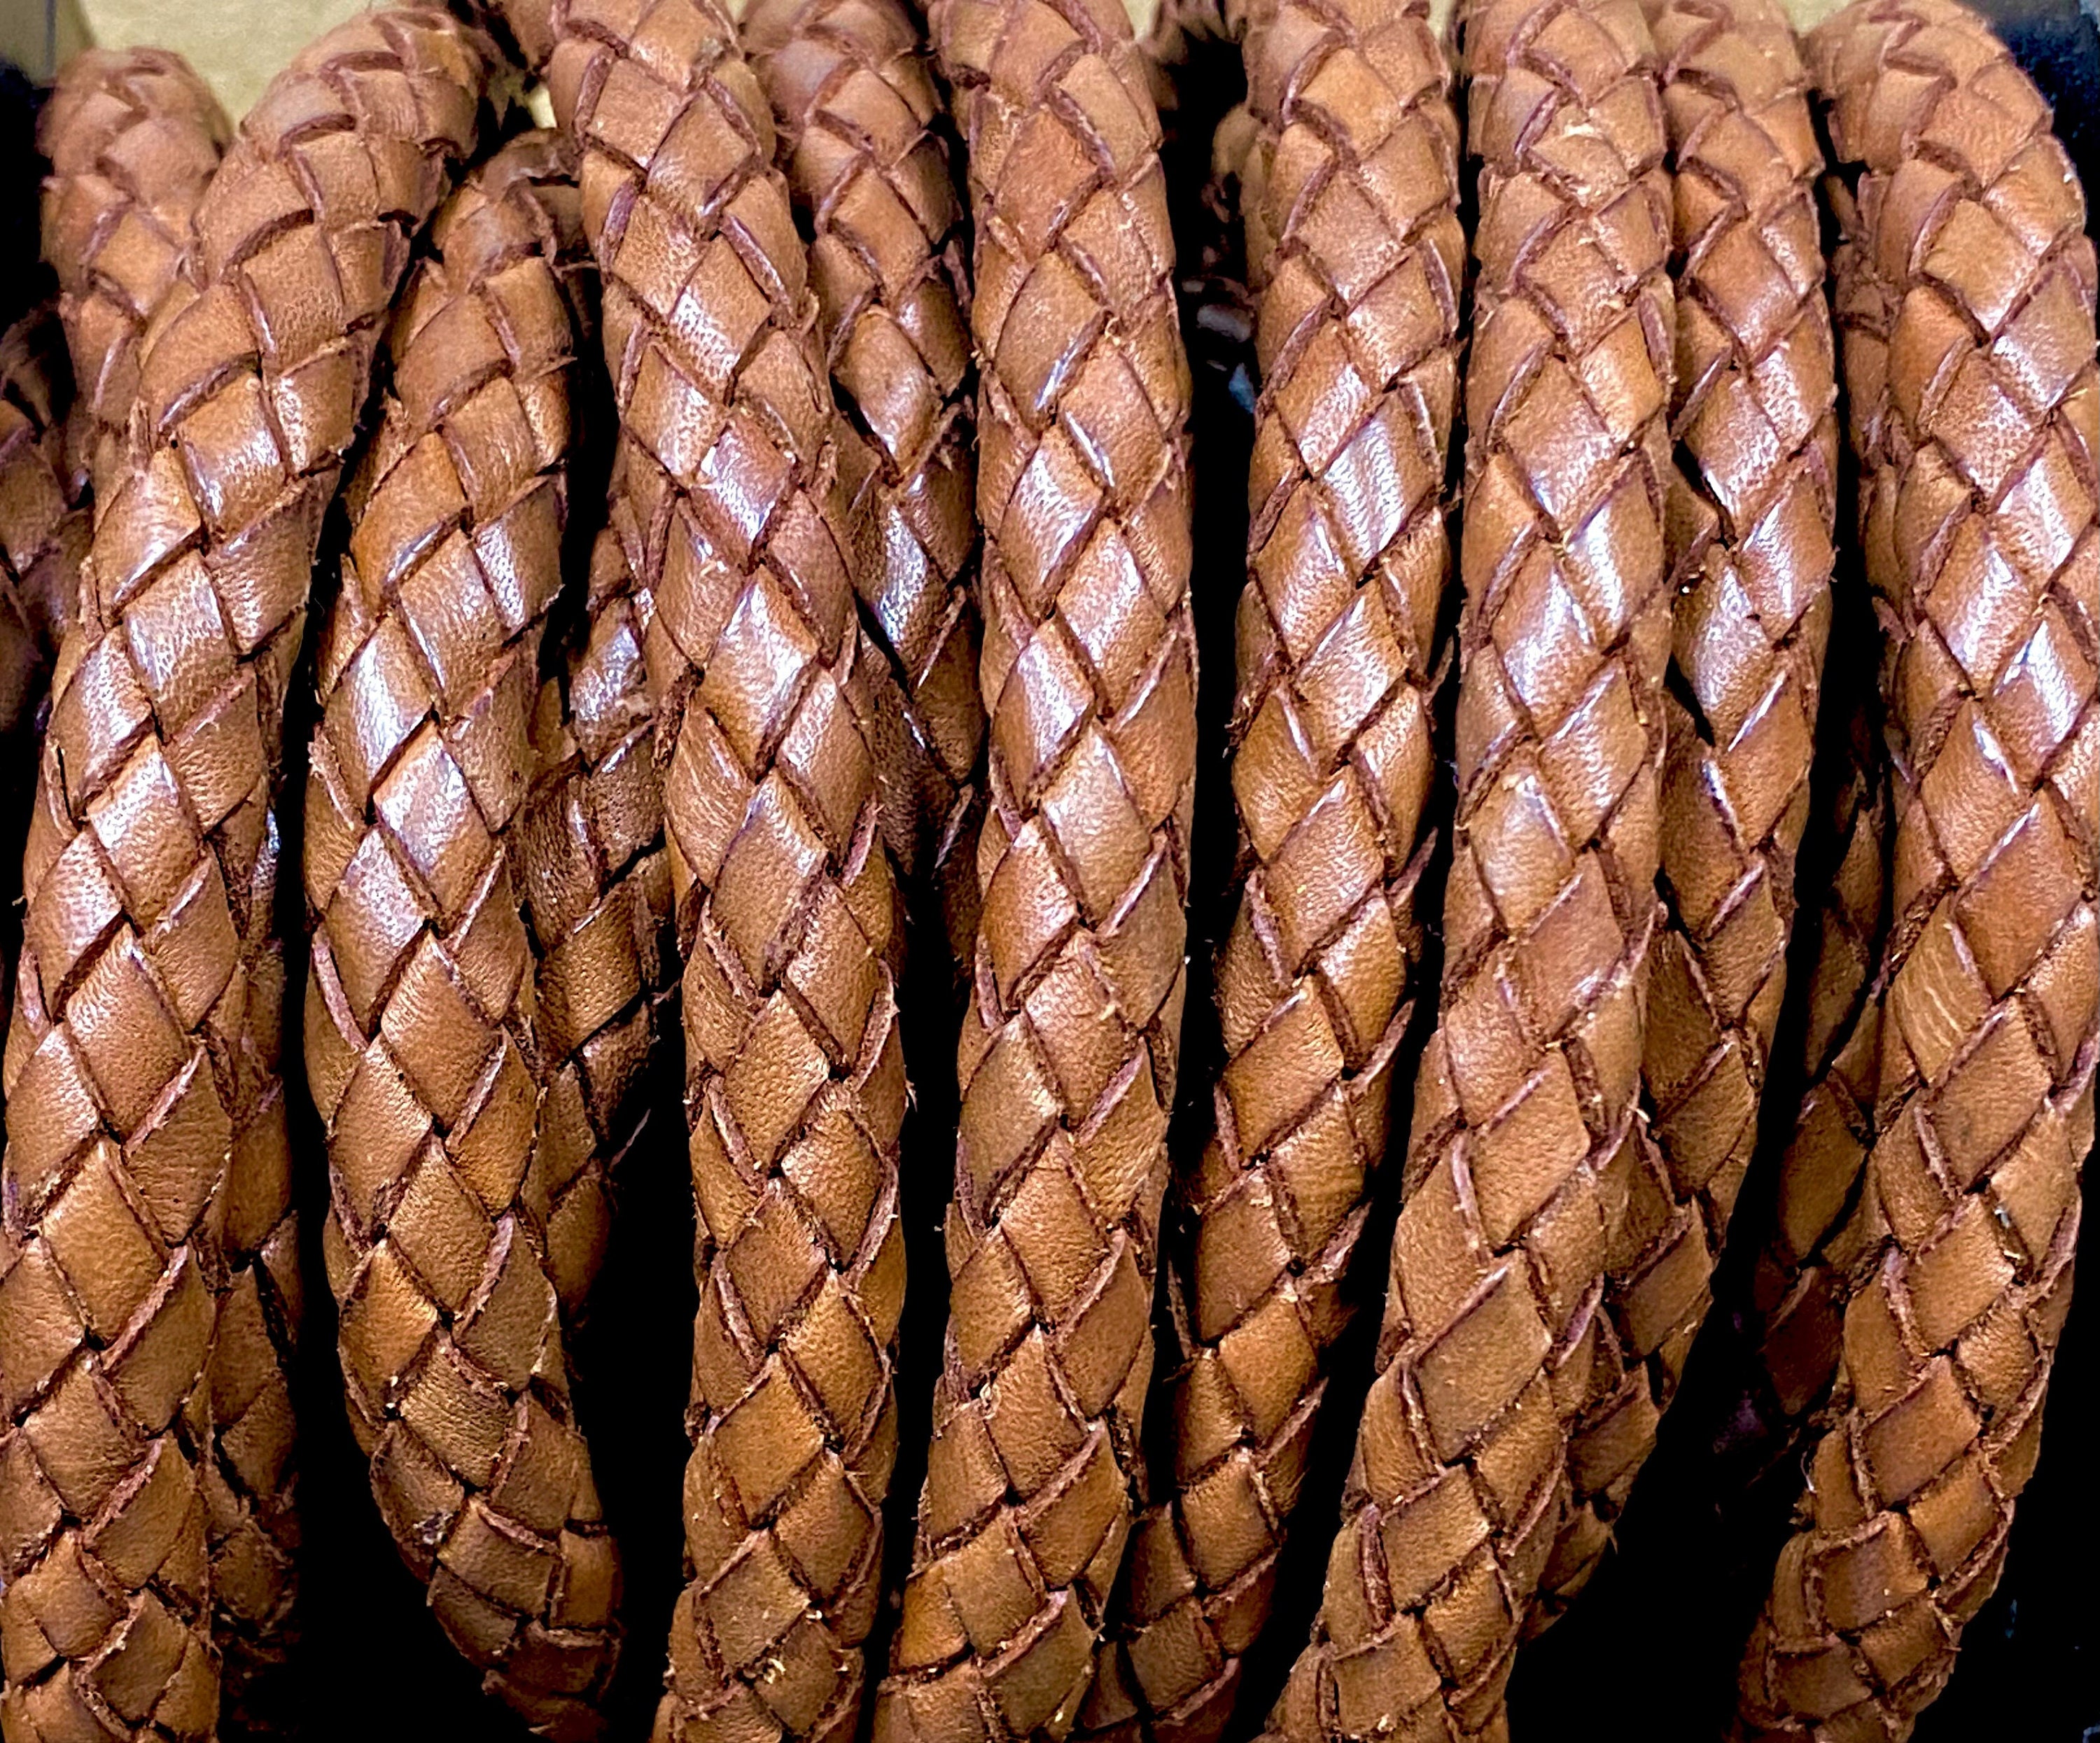 8mm Flat Braided Leather Cord Light Brown C54 